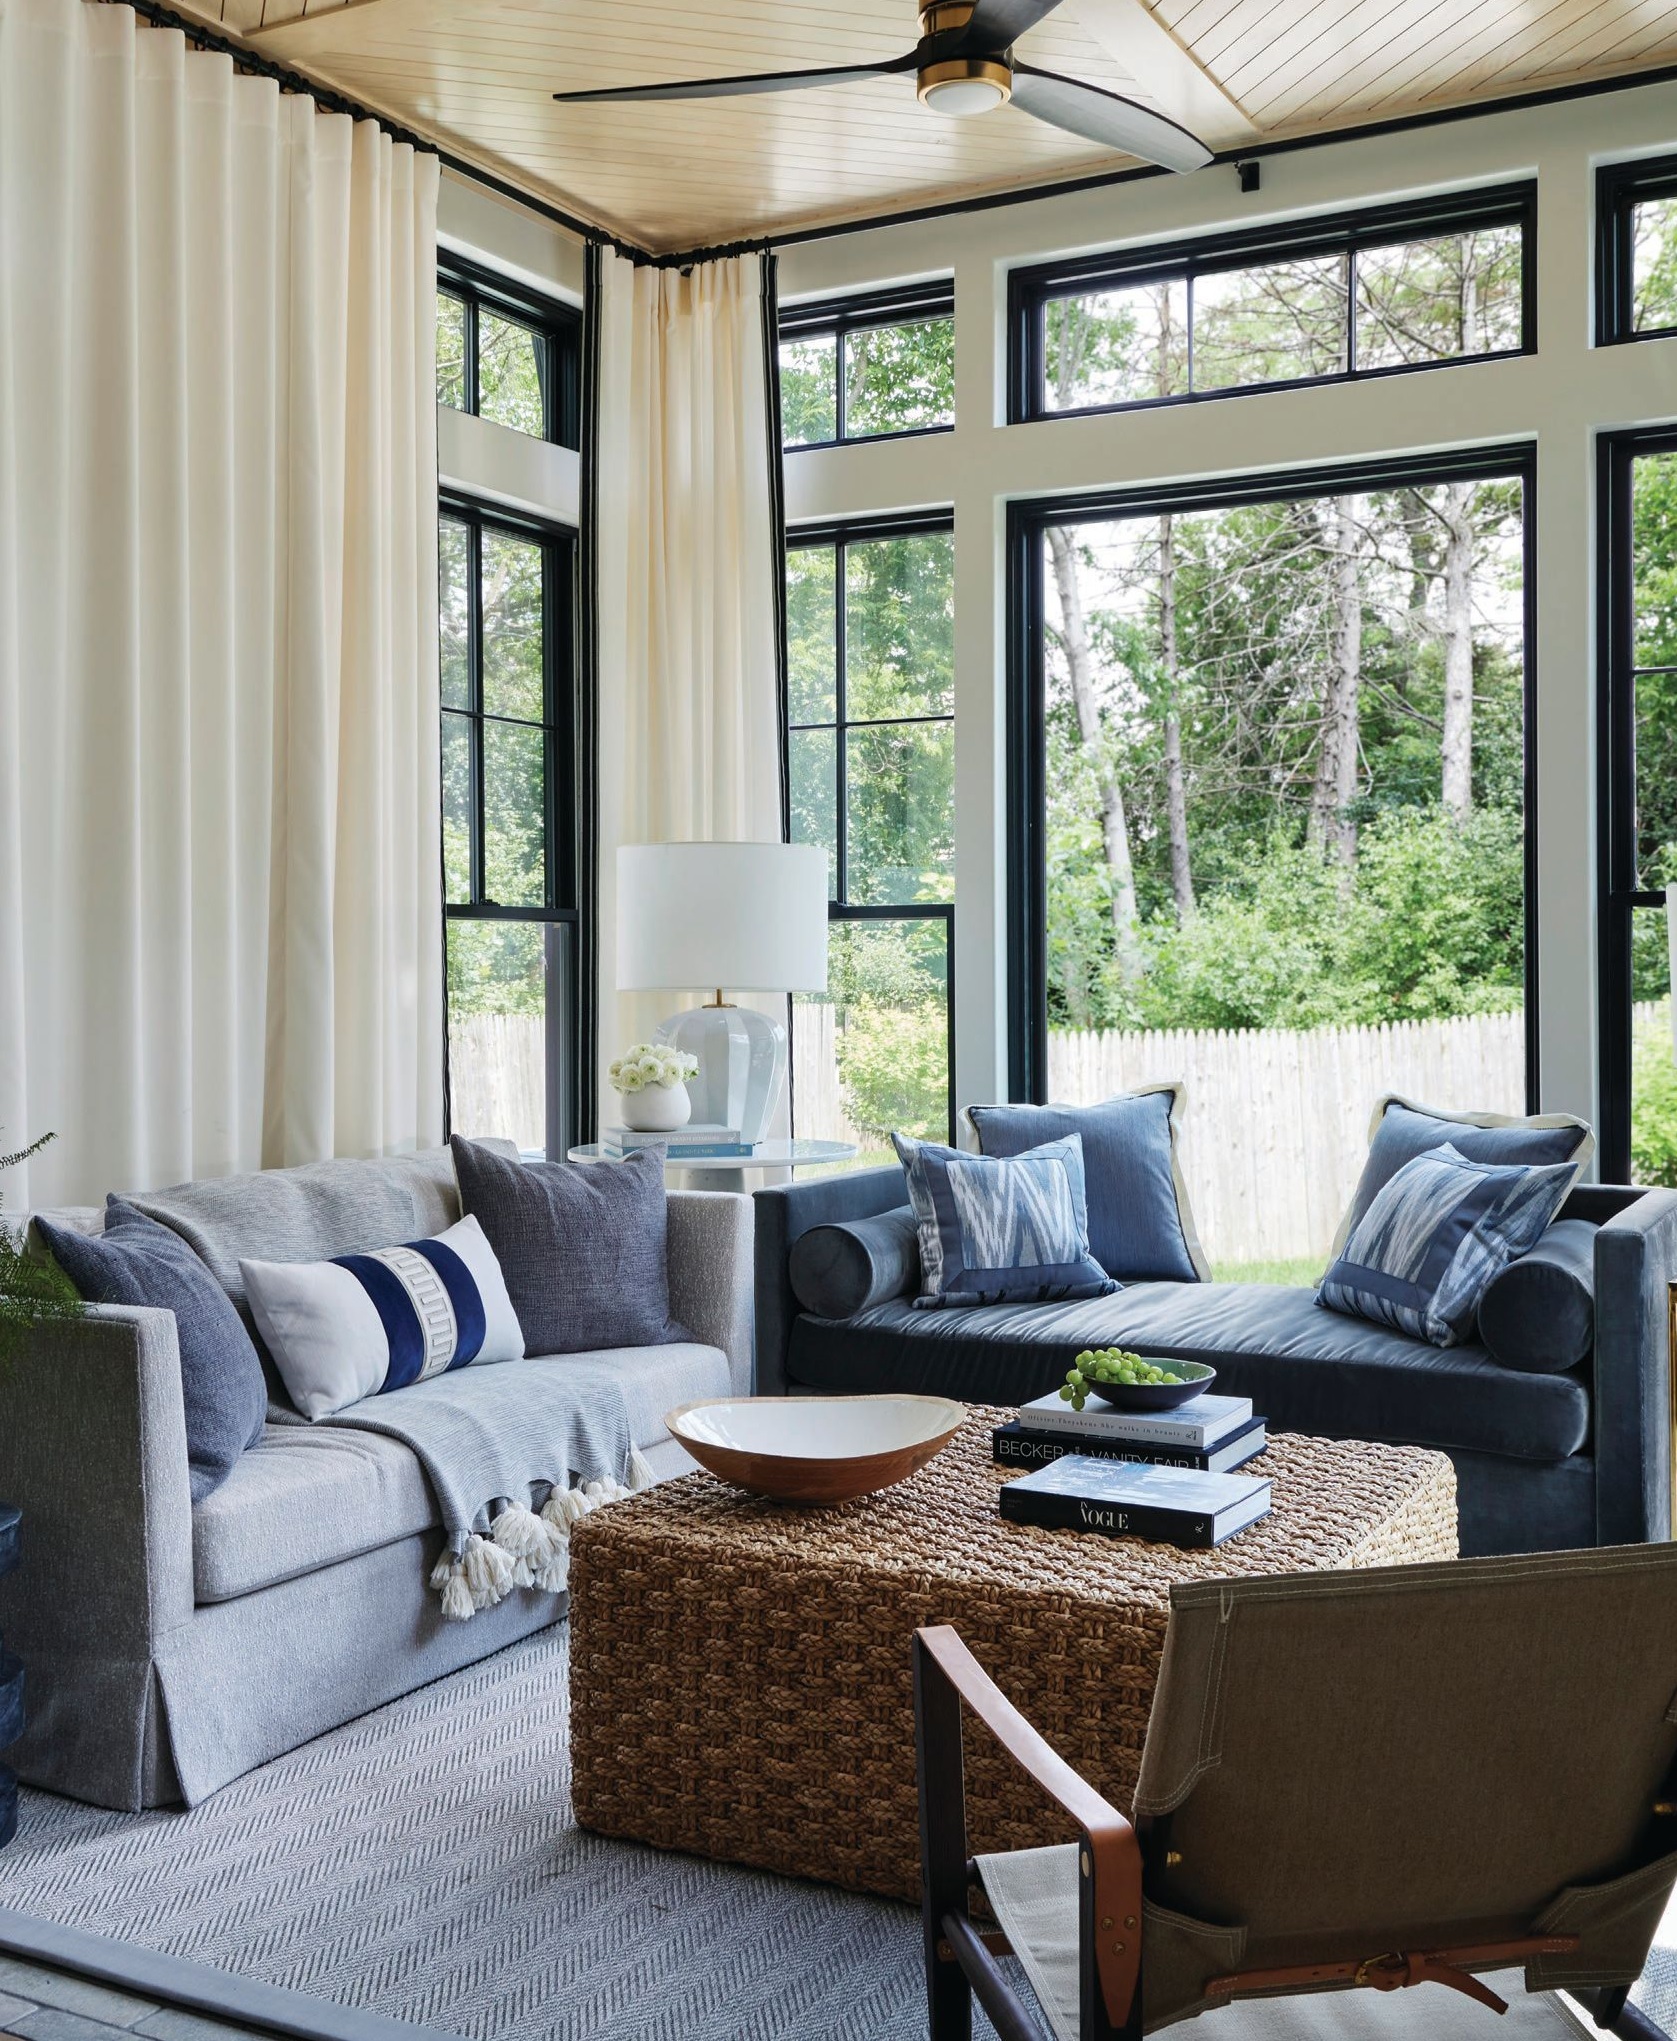 A custom skirted sofa upholstered in Sand Drift outdoor fabric by Holly Hunt and a seagrass coffee table by Palacek highlight the airy sunroom. Photographed by Werner Straube